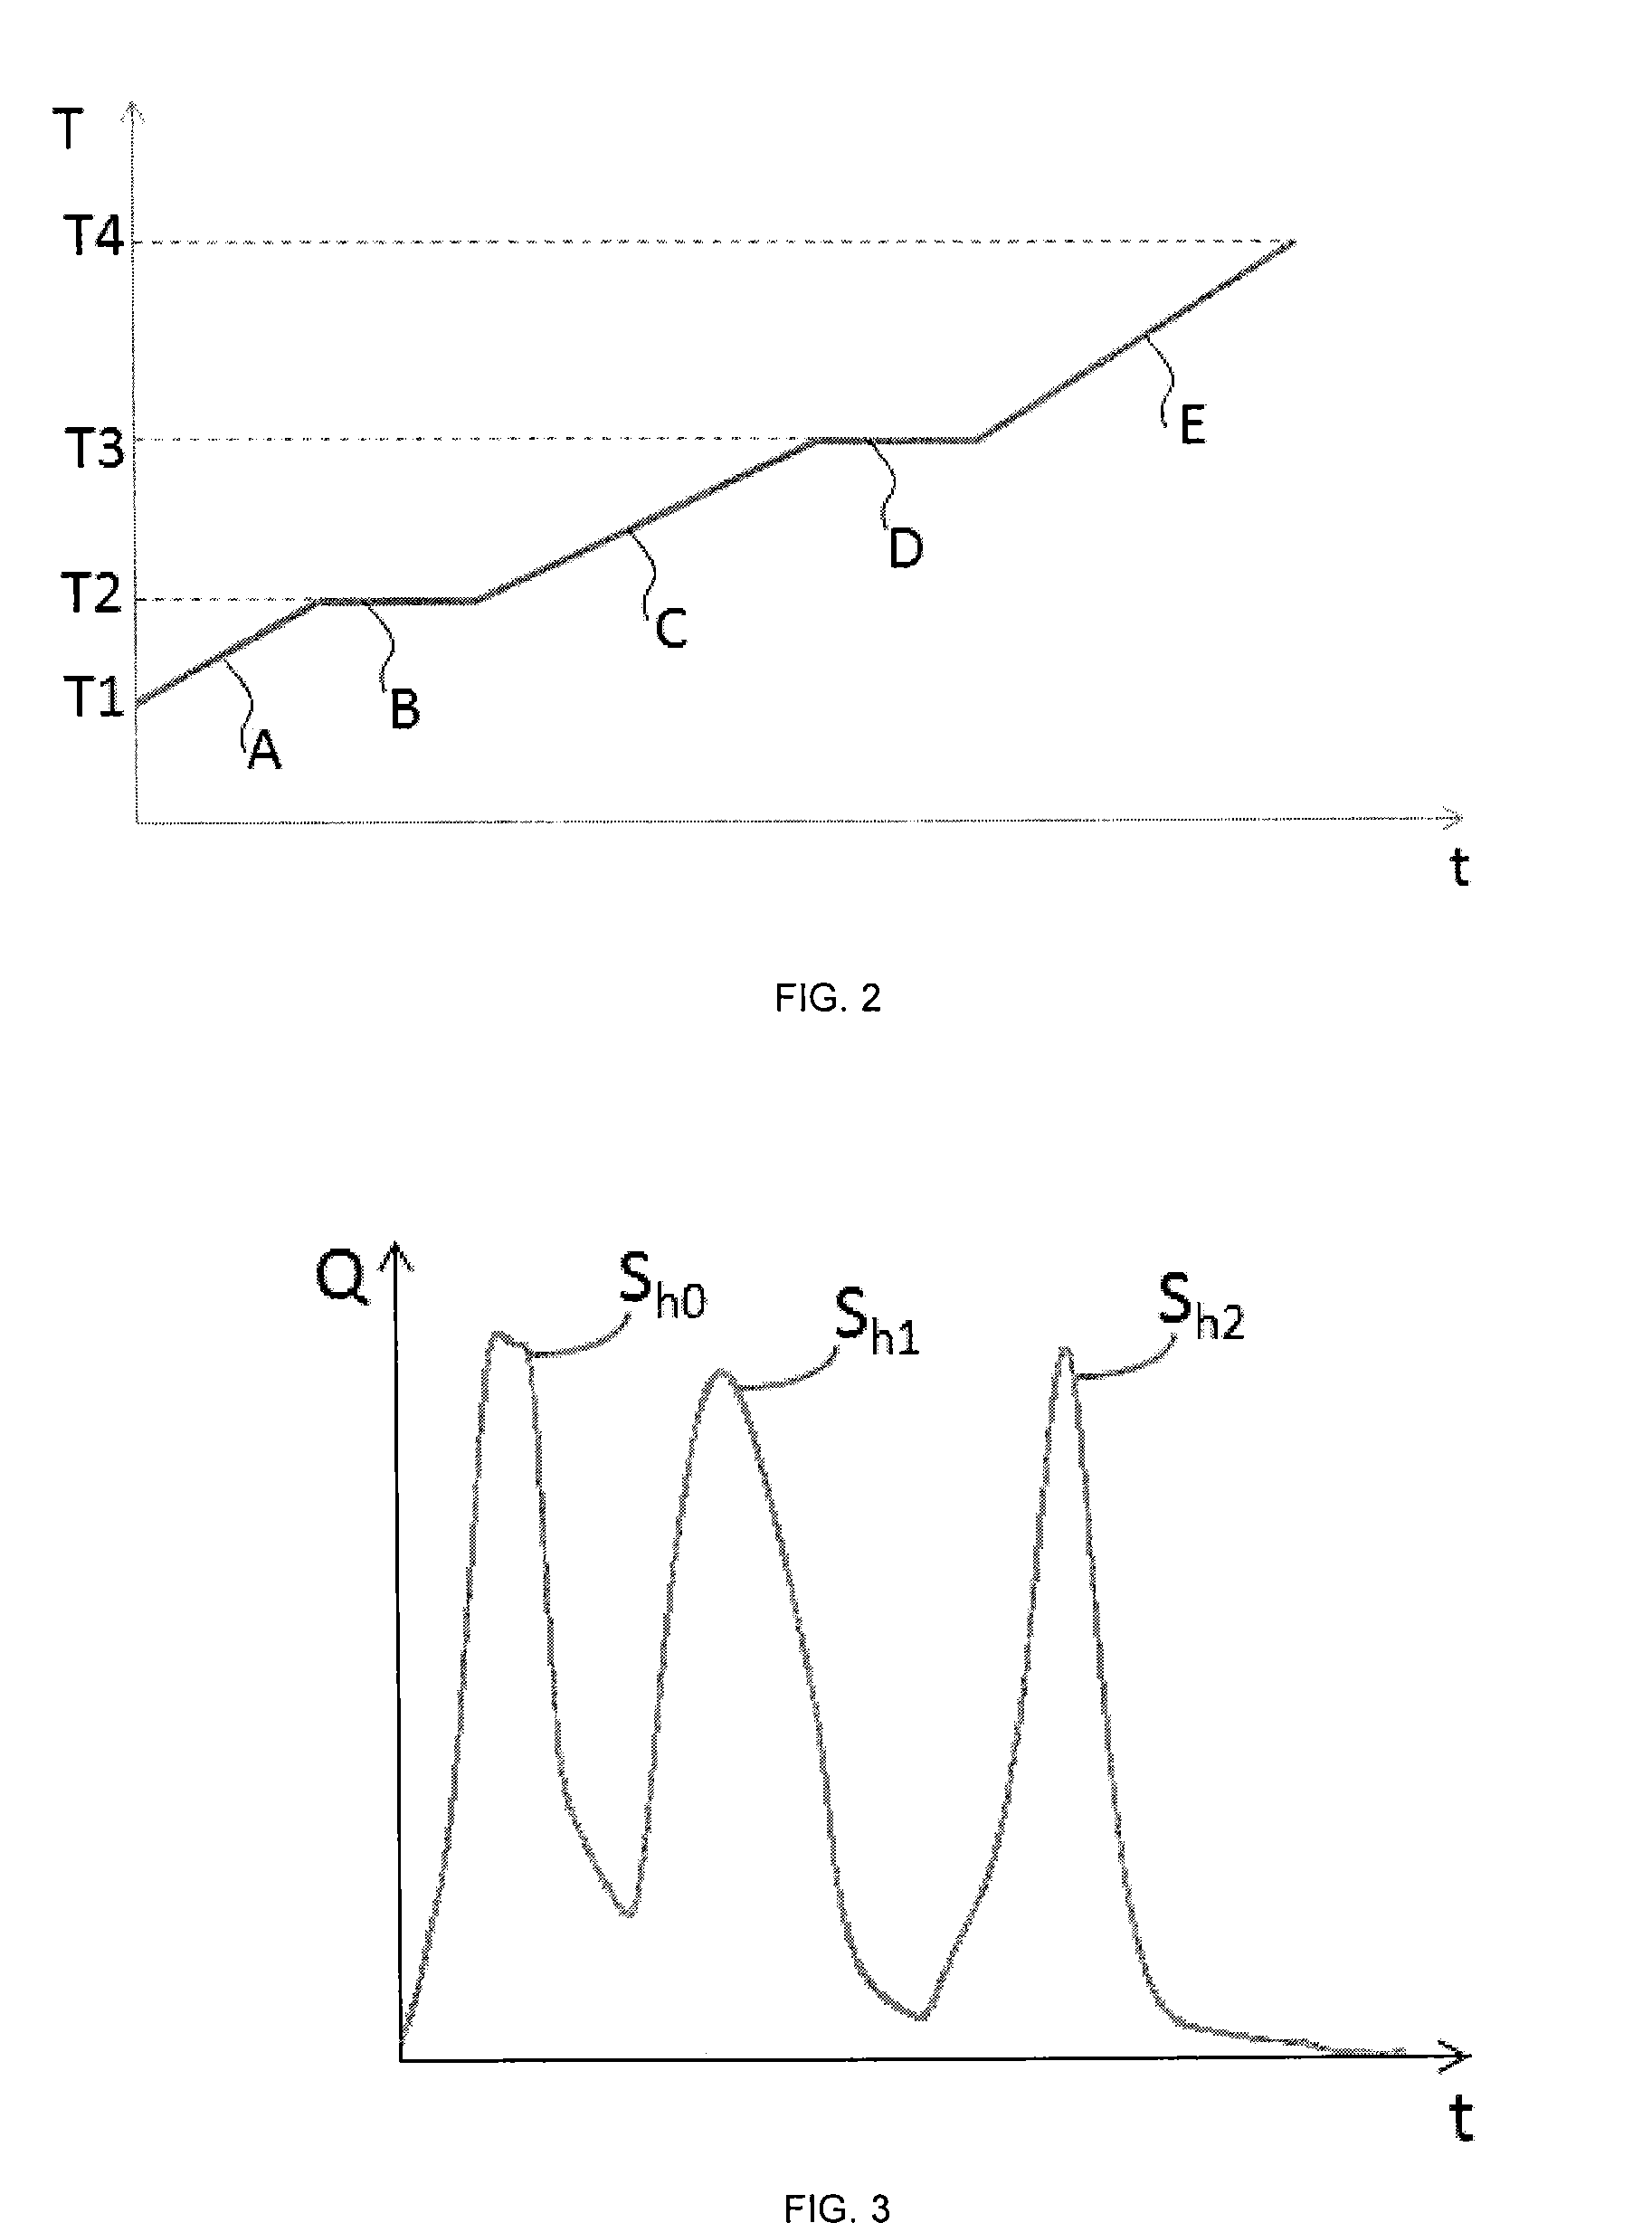 Method of assessing at least one petroleum characteristic of a rock sample